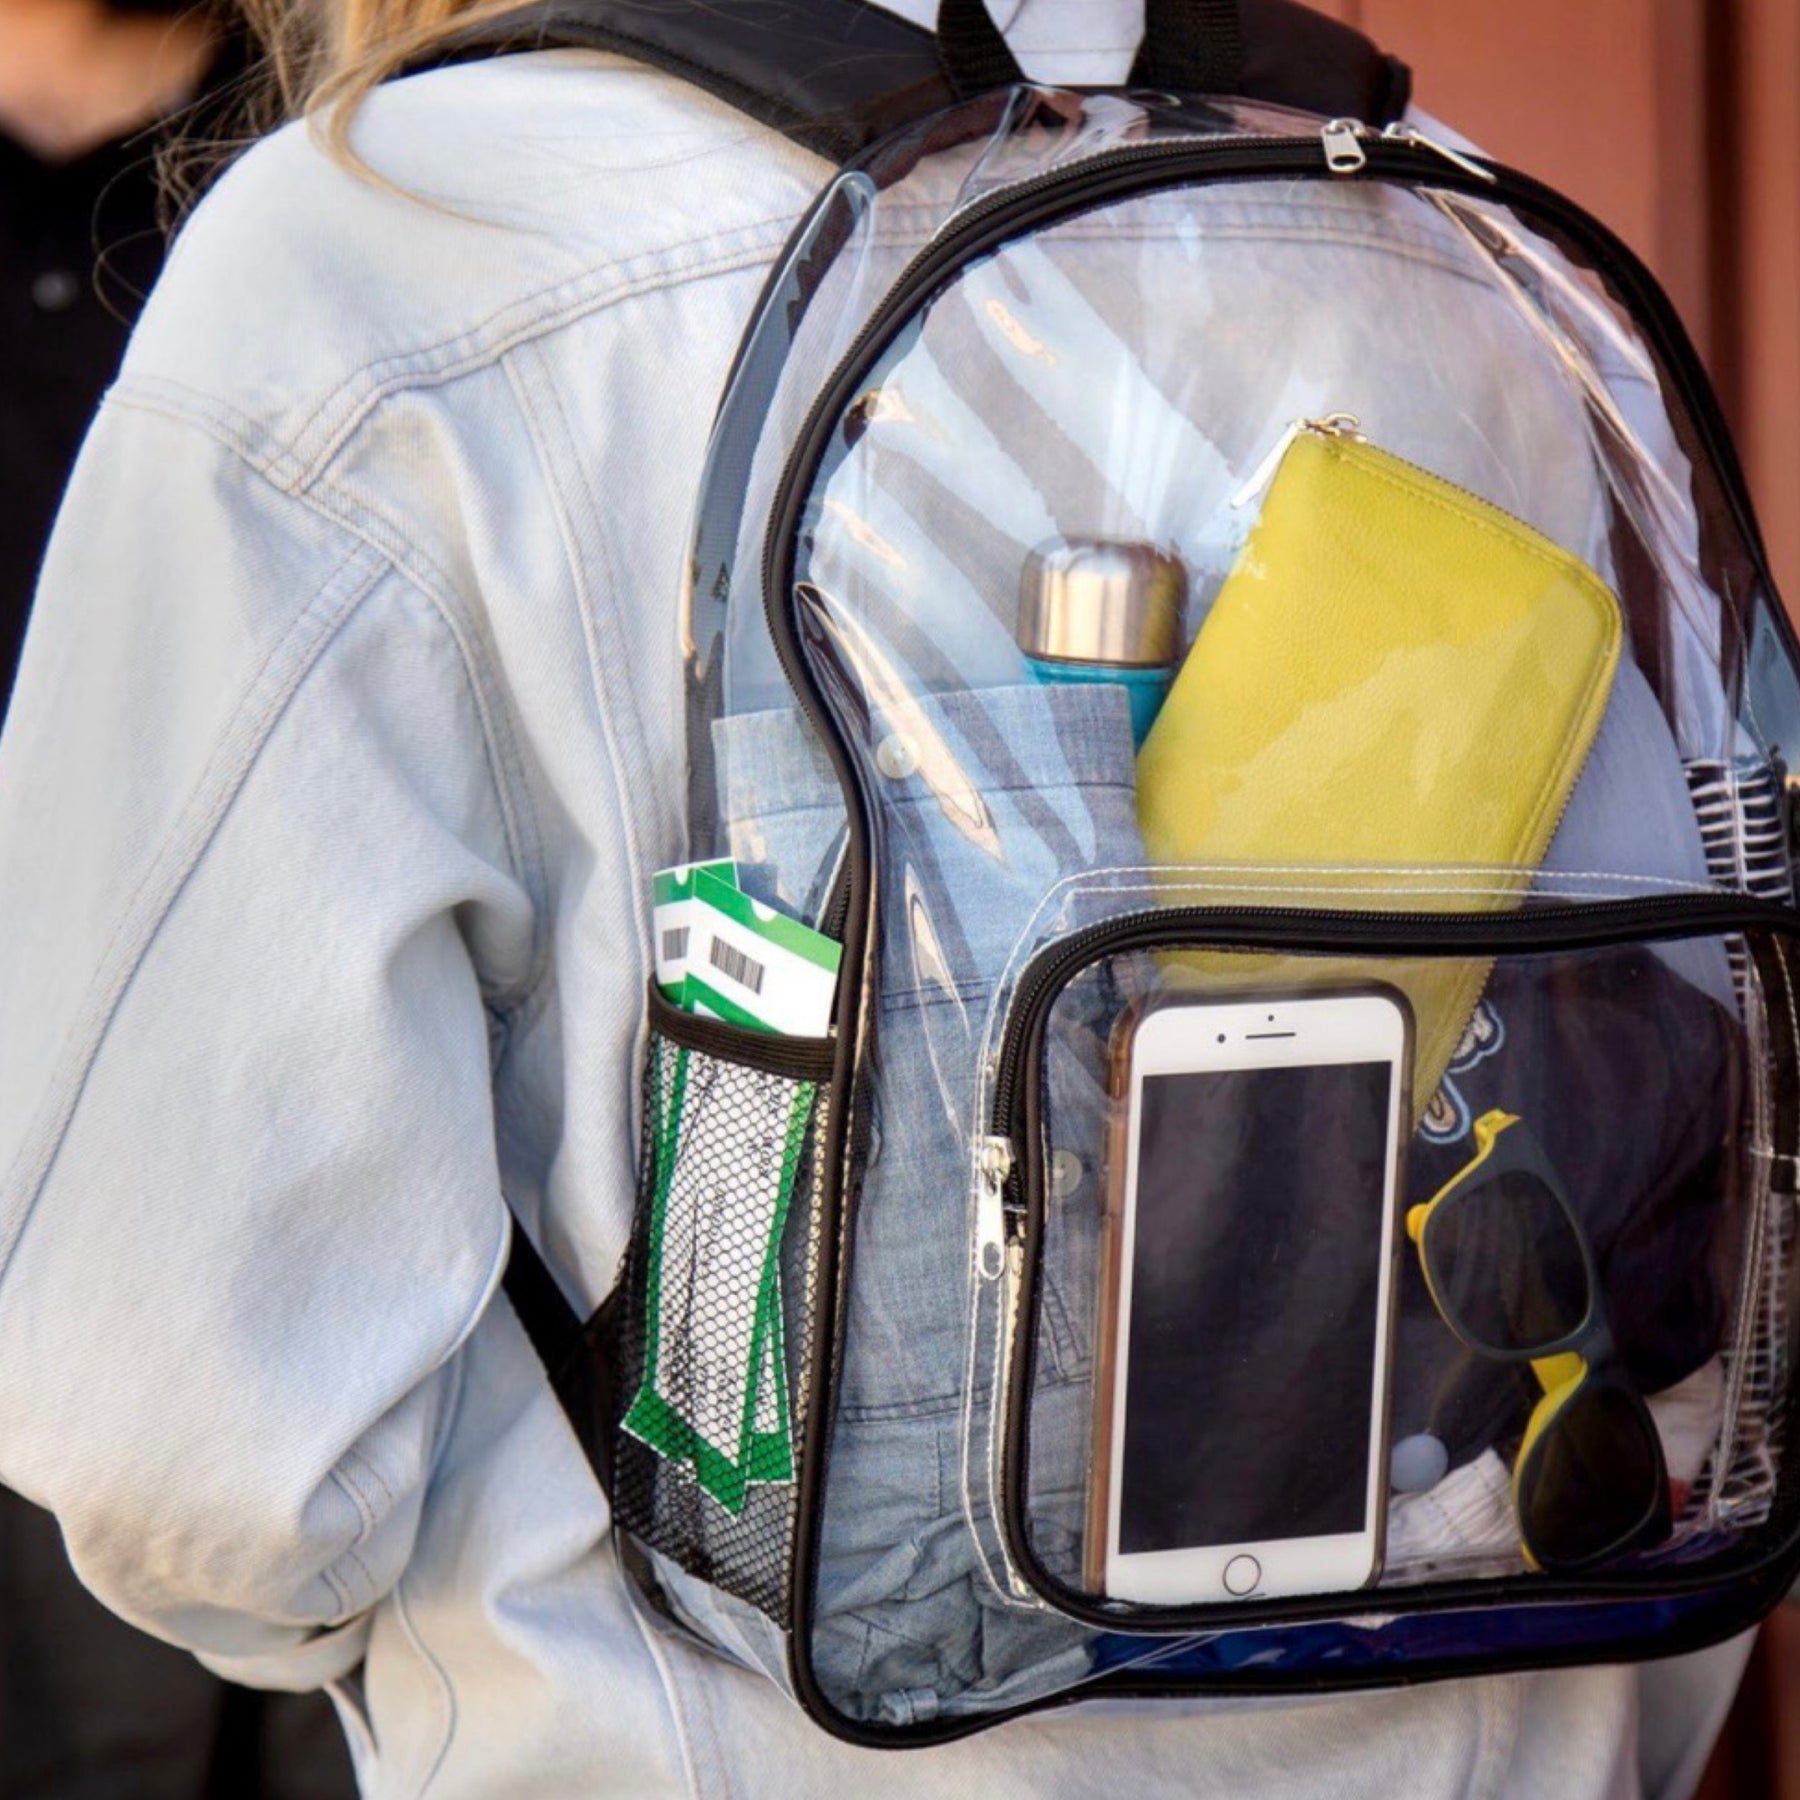 Transparent Clear Backpack - For Concerts, Stadium-Approved